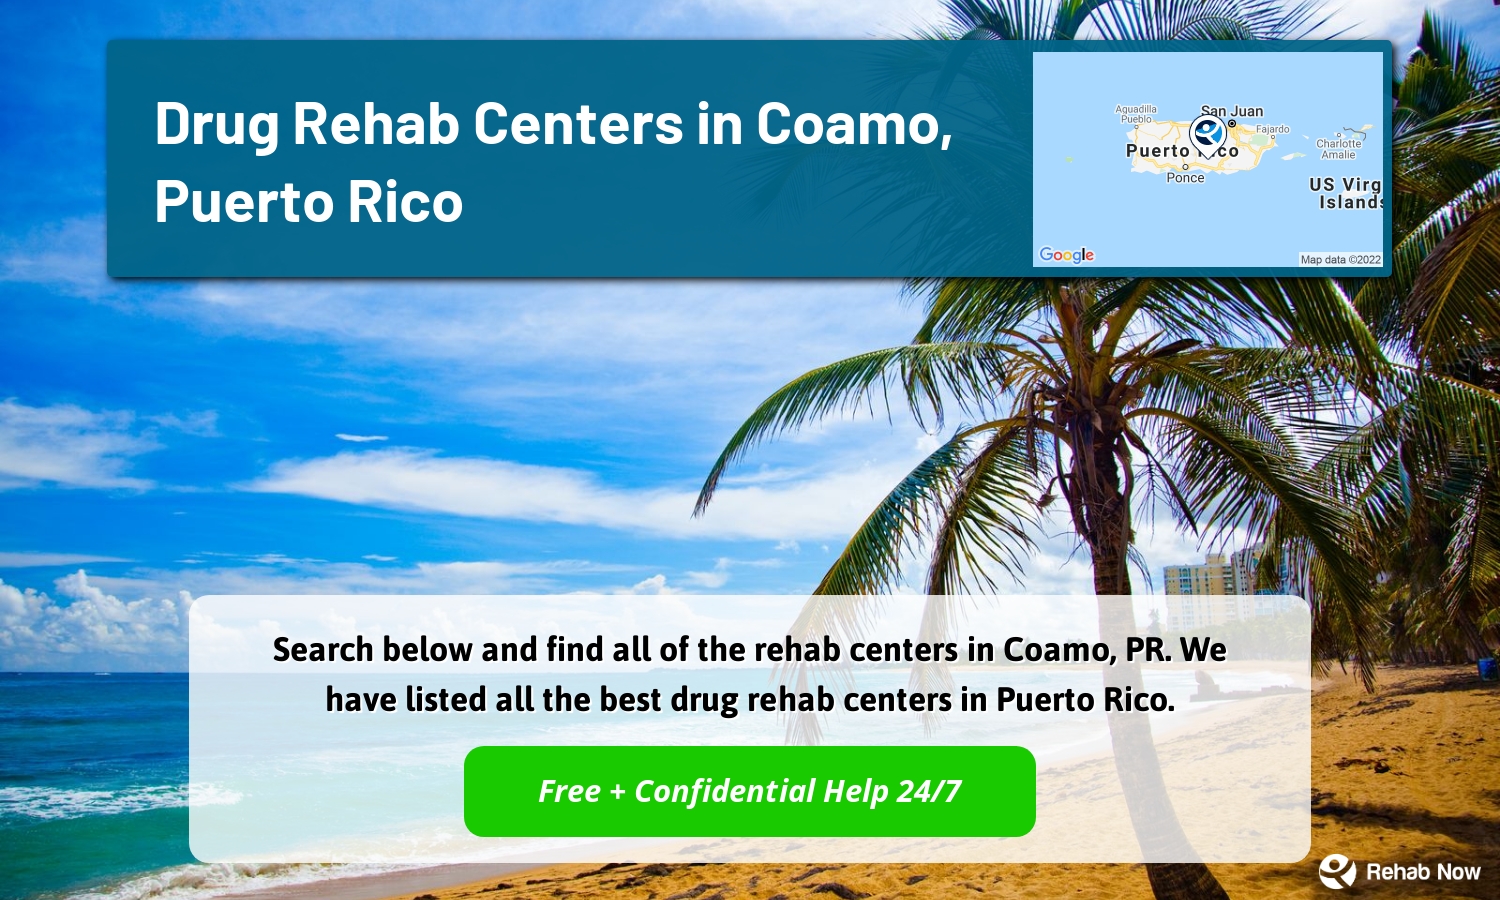 Search below and find all of the rehab centers in Coamo, PR. We have listed all the best drug rehab centers in Puerto Rico.